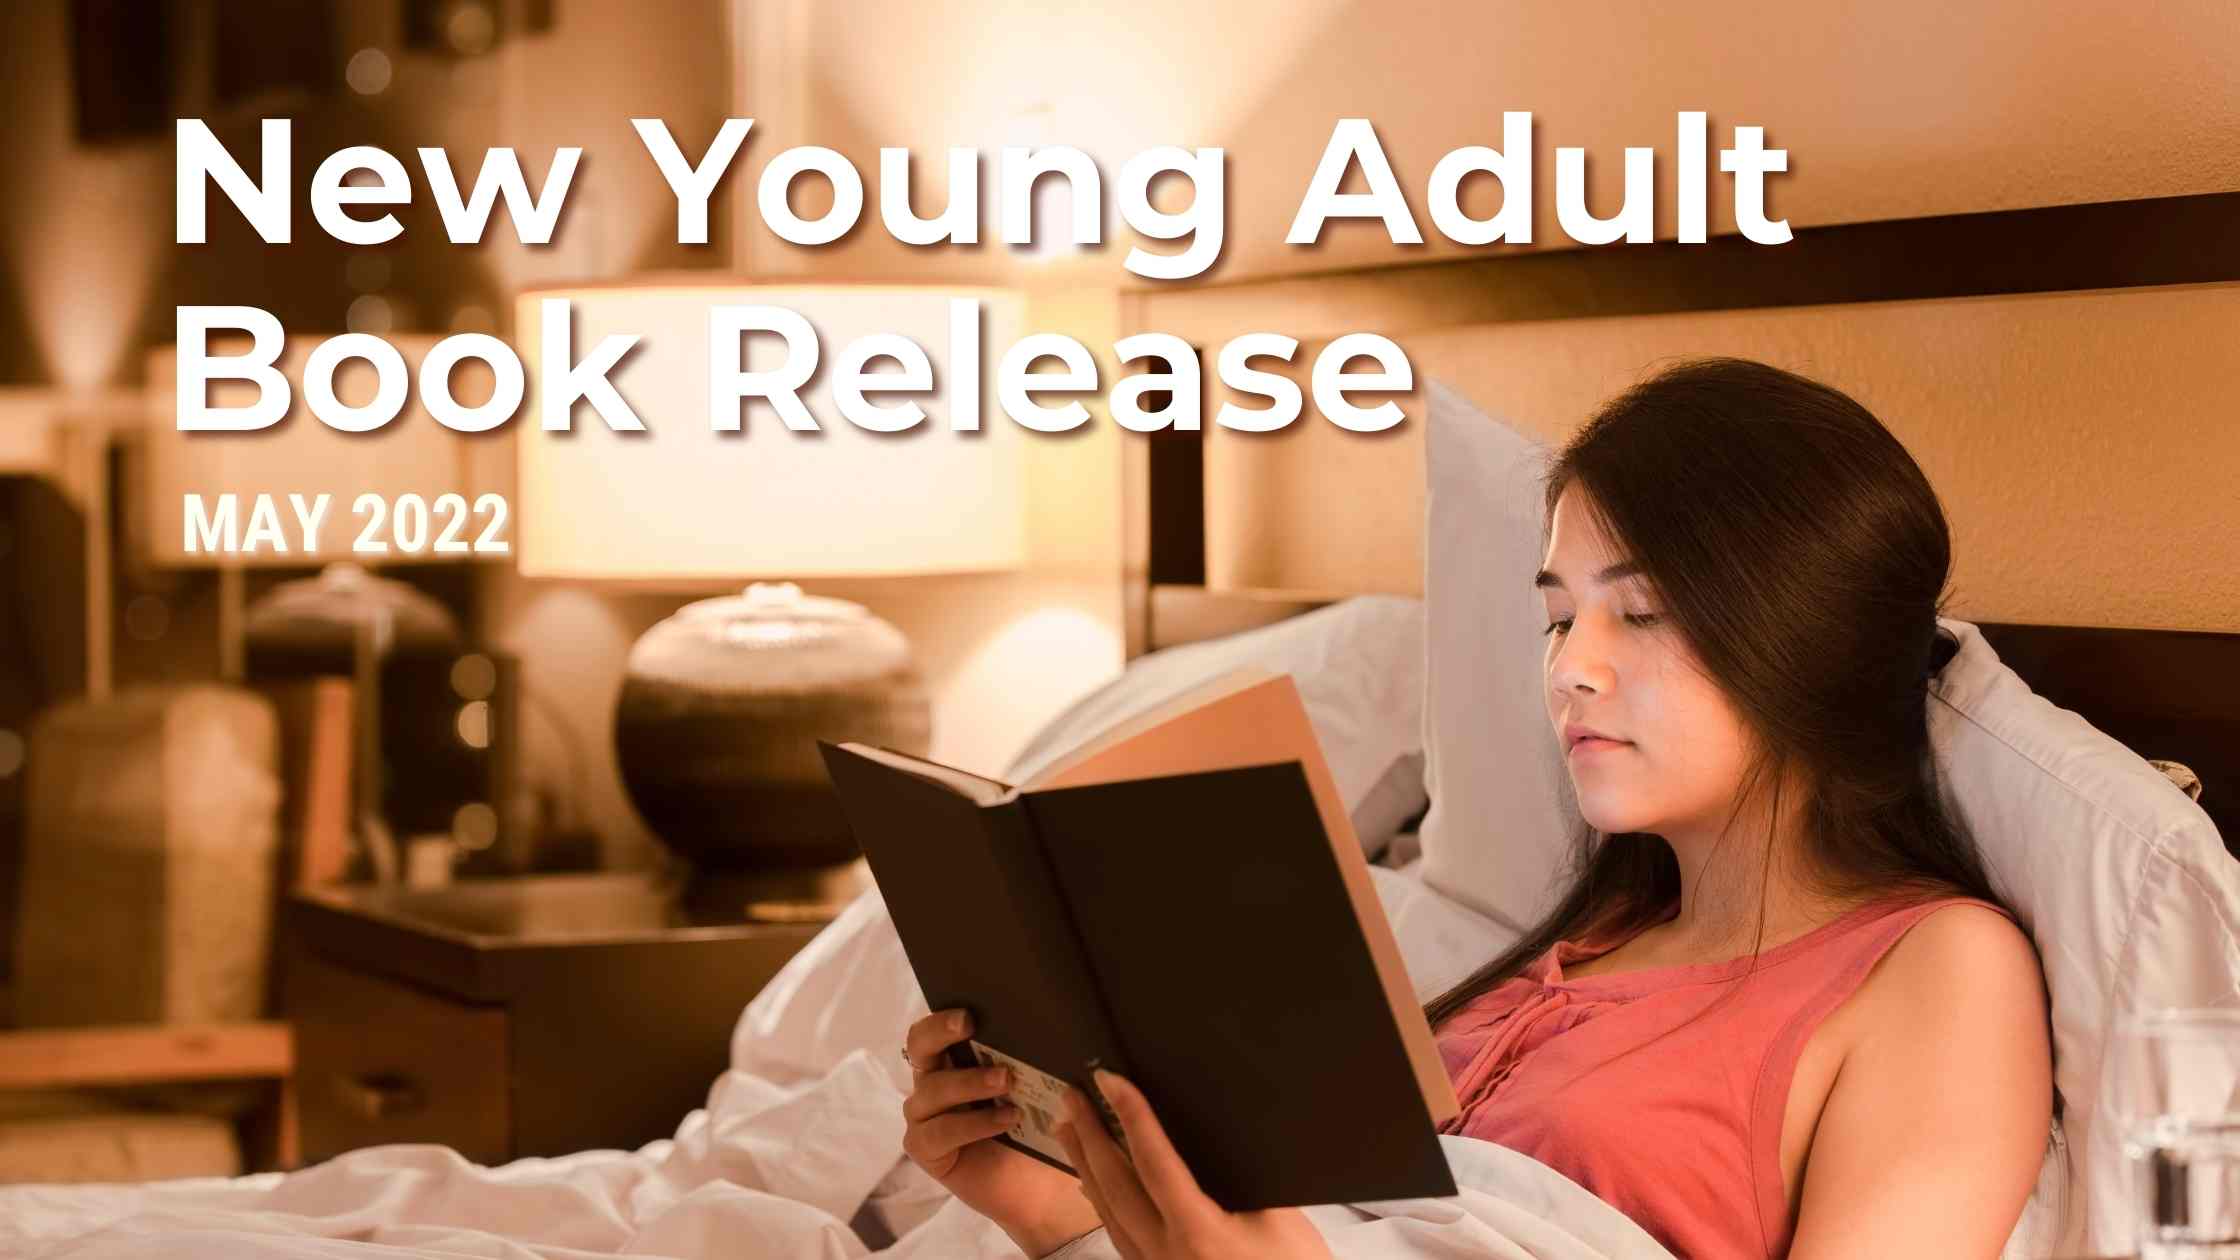 New Young Adult Book Release May 2022